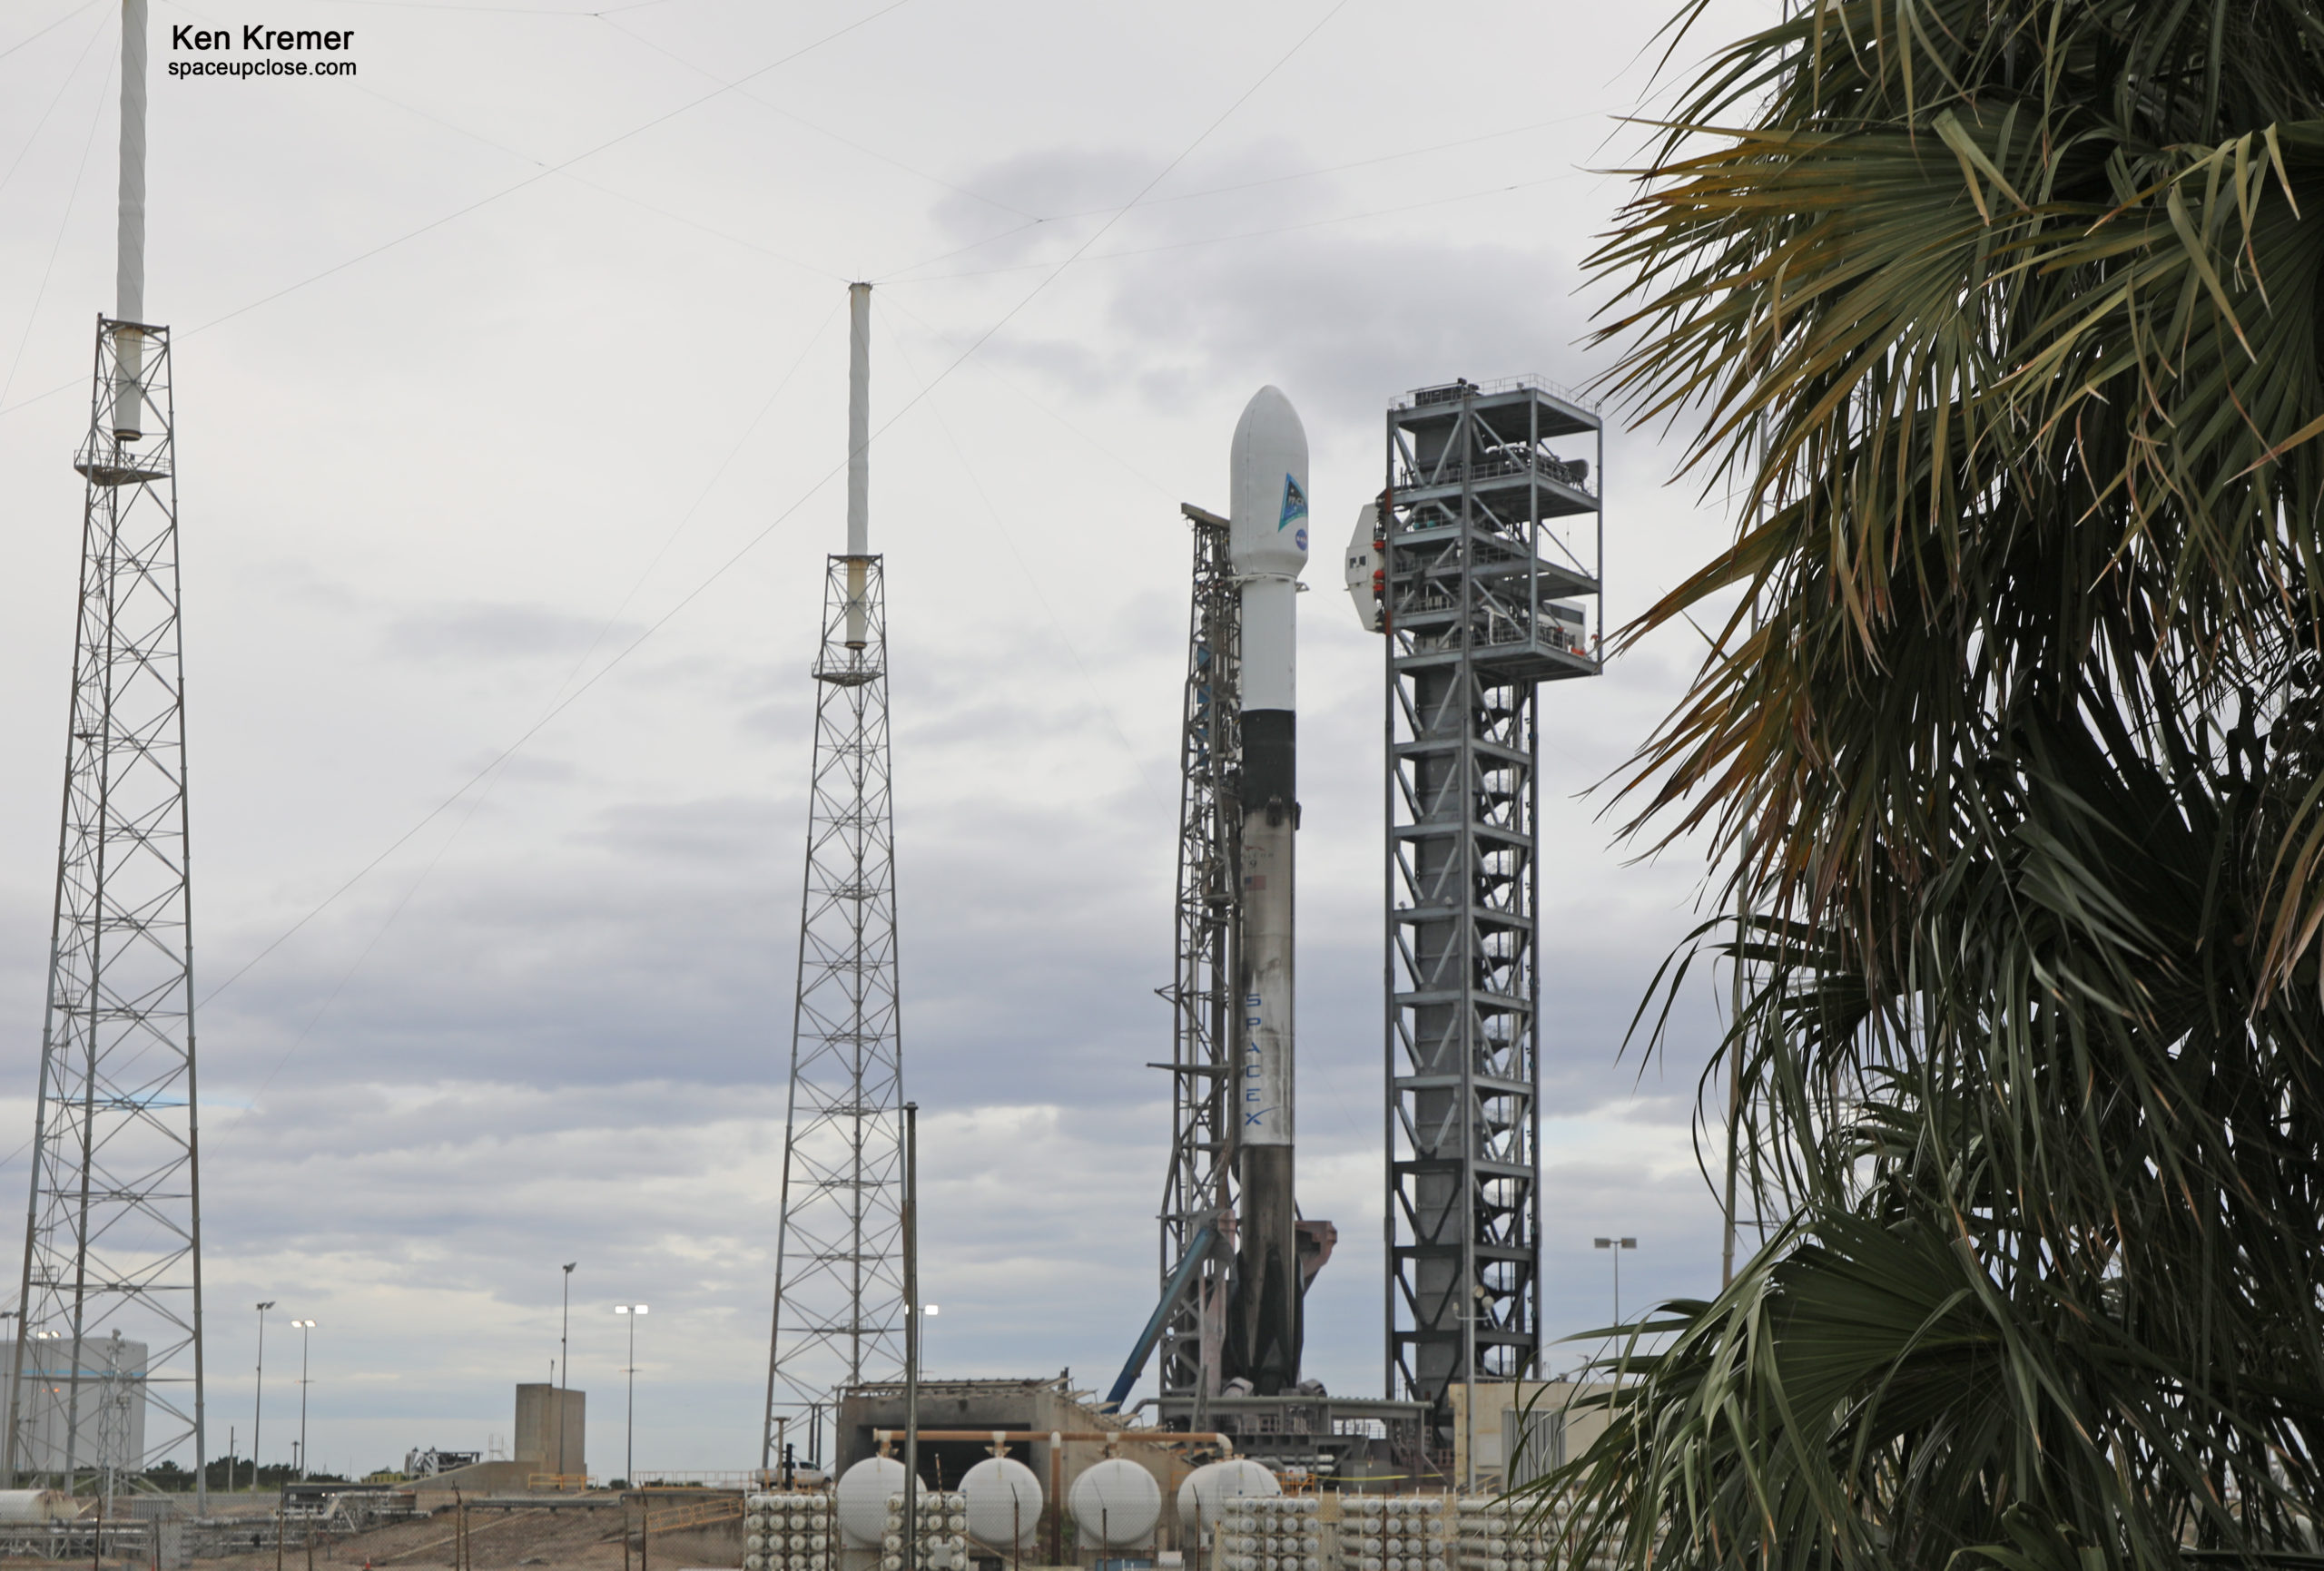 NASA PACE Earth Observing Satellite Ready for Launch Feb. 8 After Windy Weather Delays: Photos